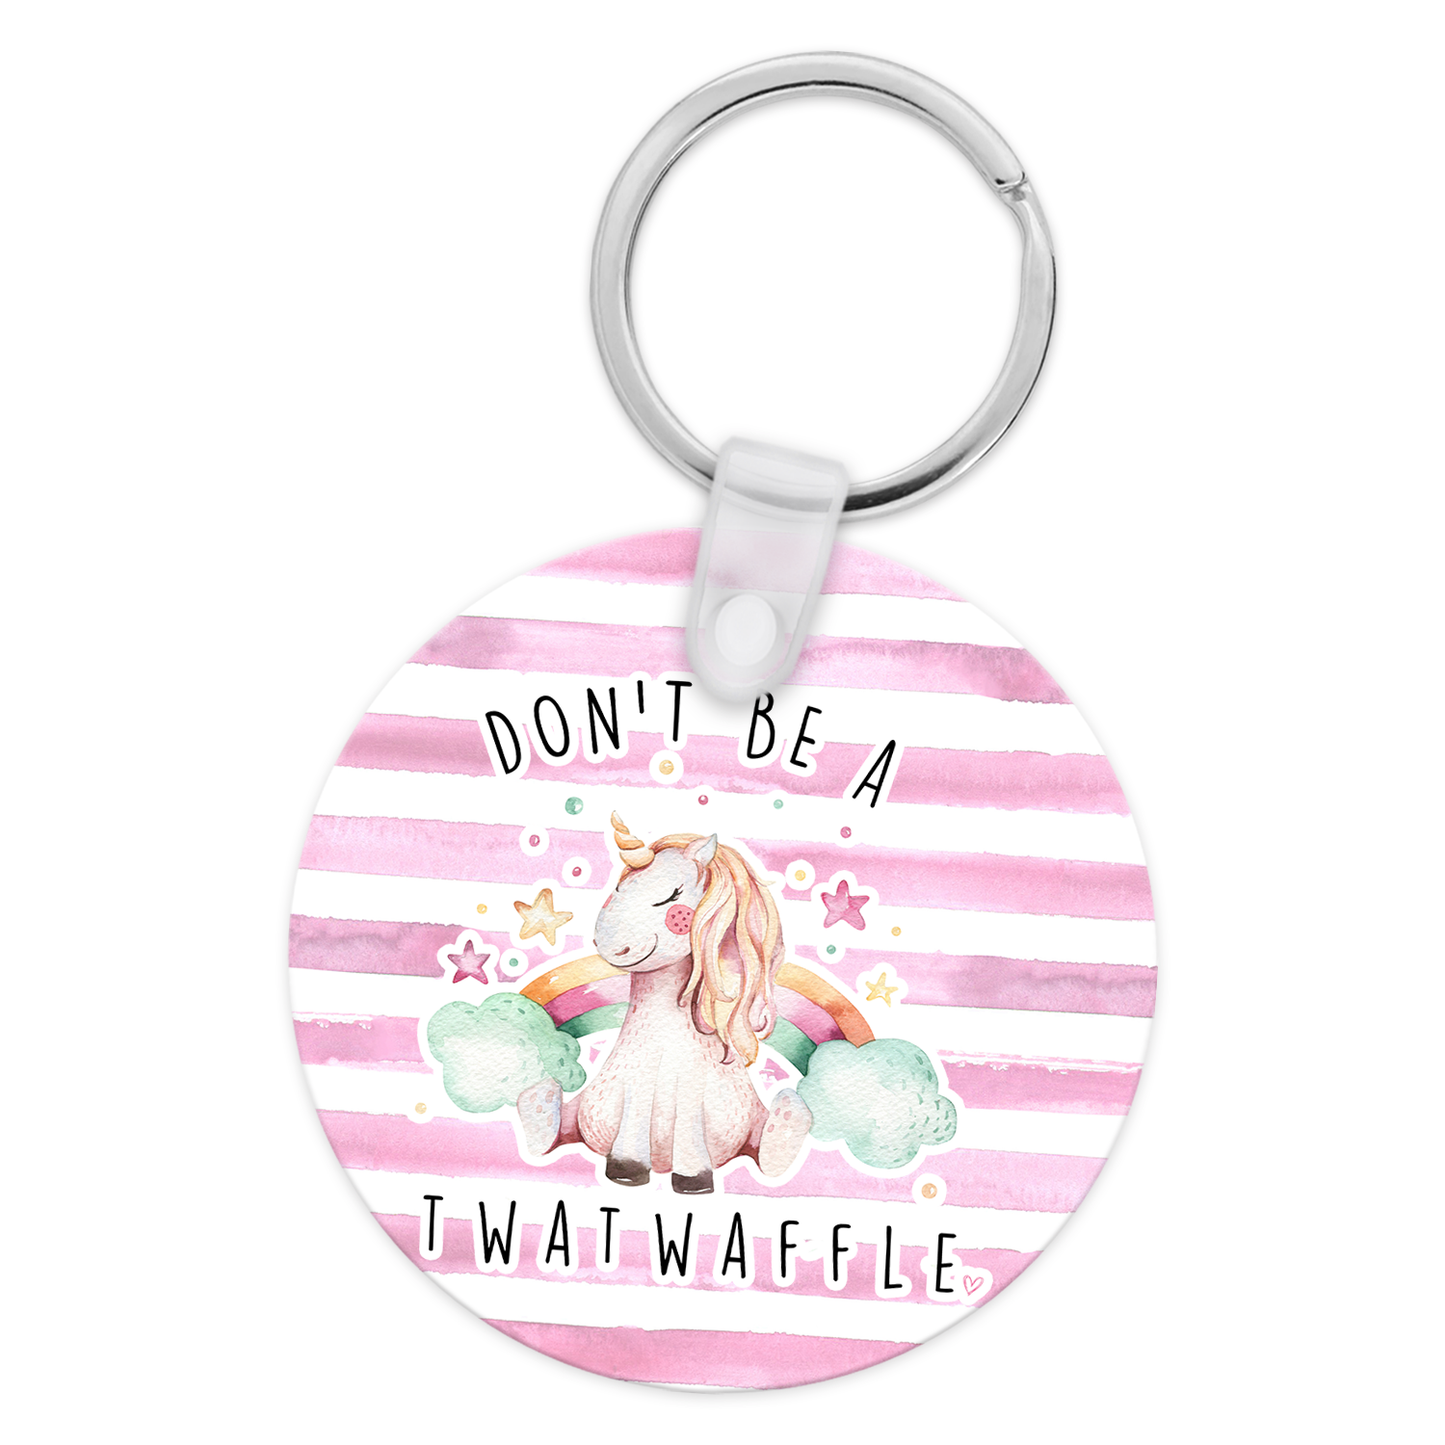 Don't Be A Twatwaffle Keychain